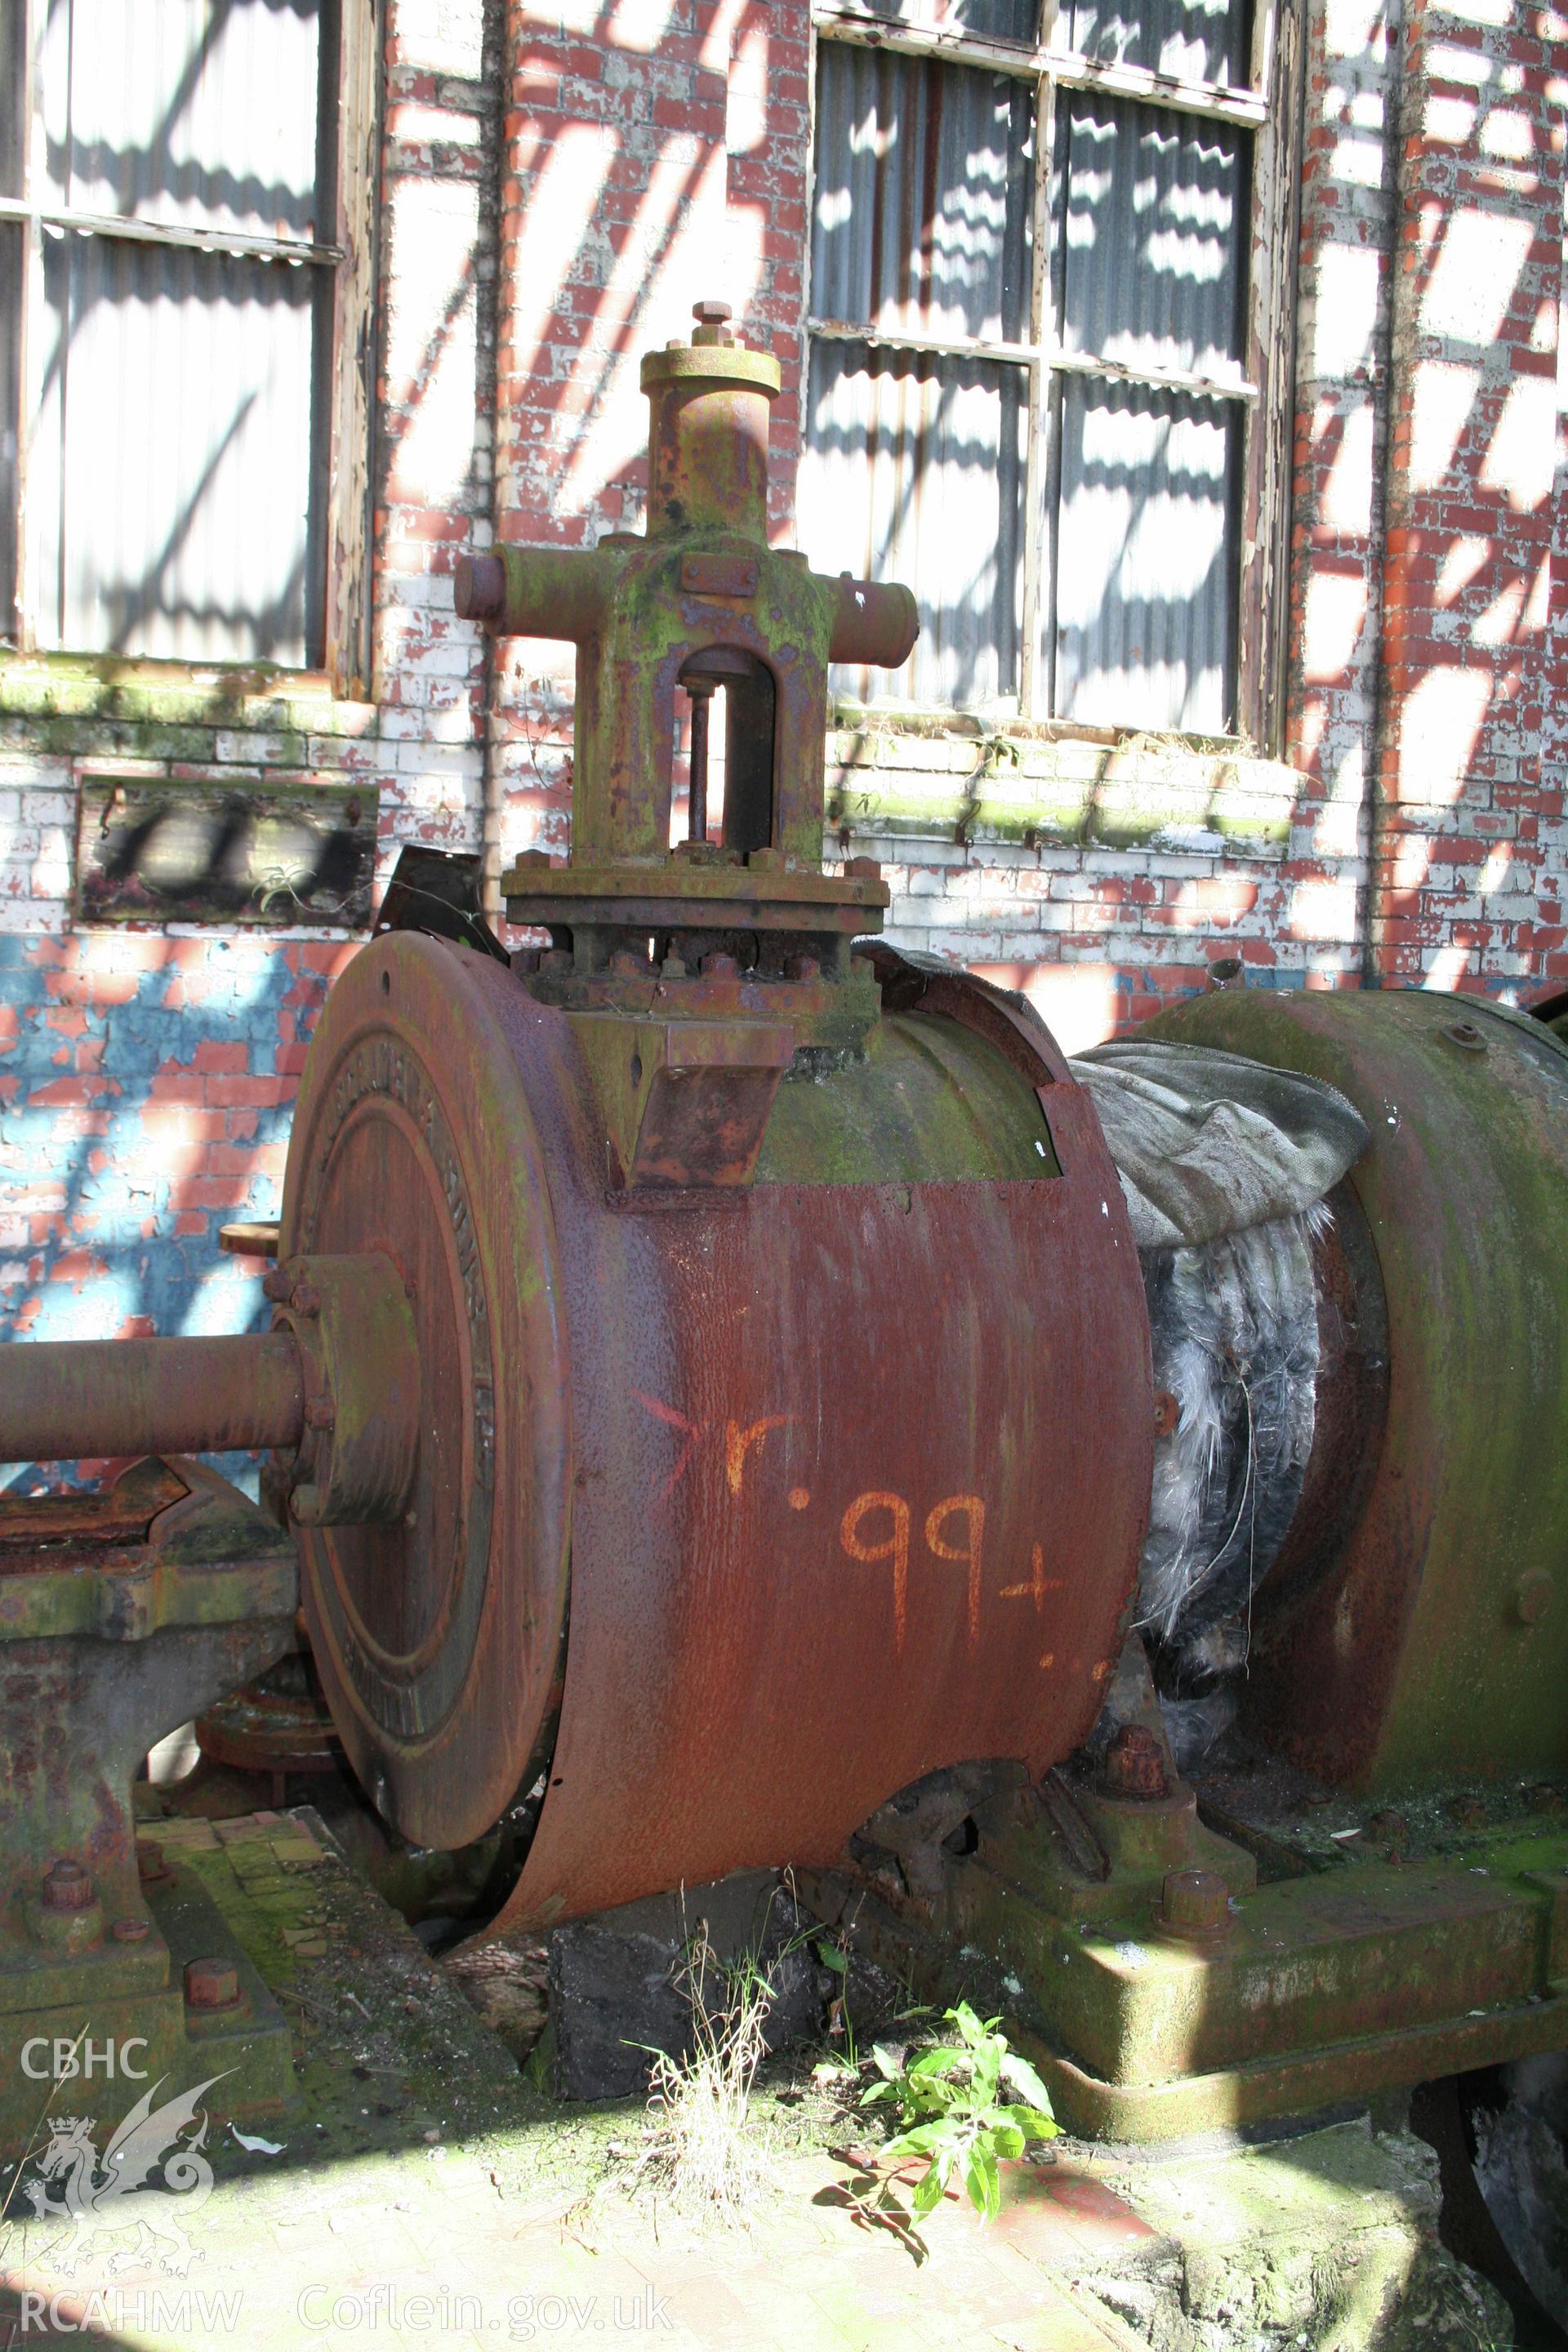 1910 Musgrove Engine, detail of the west end of the cylinder and one of the inlet valves.